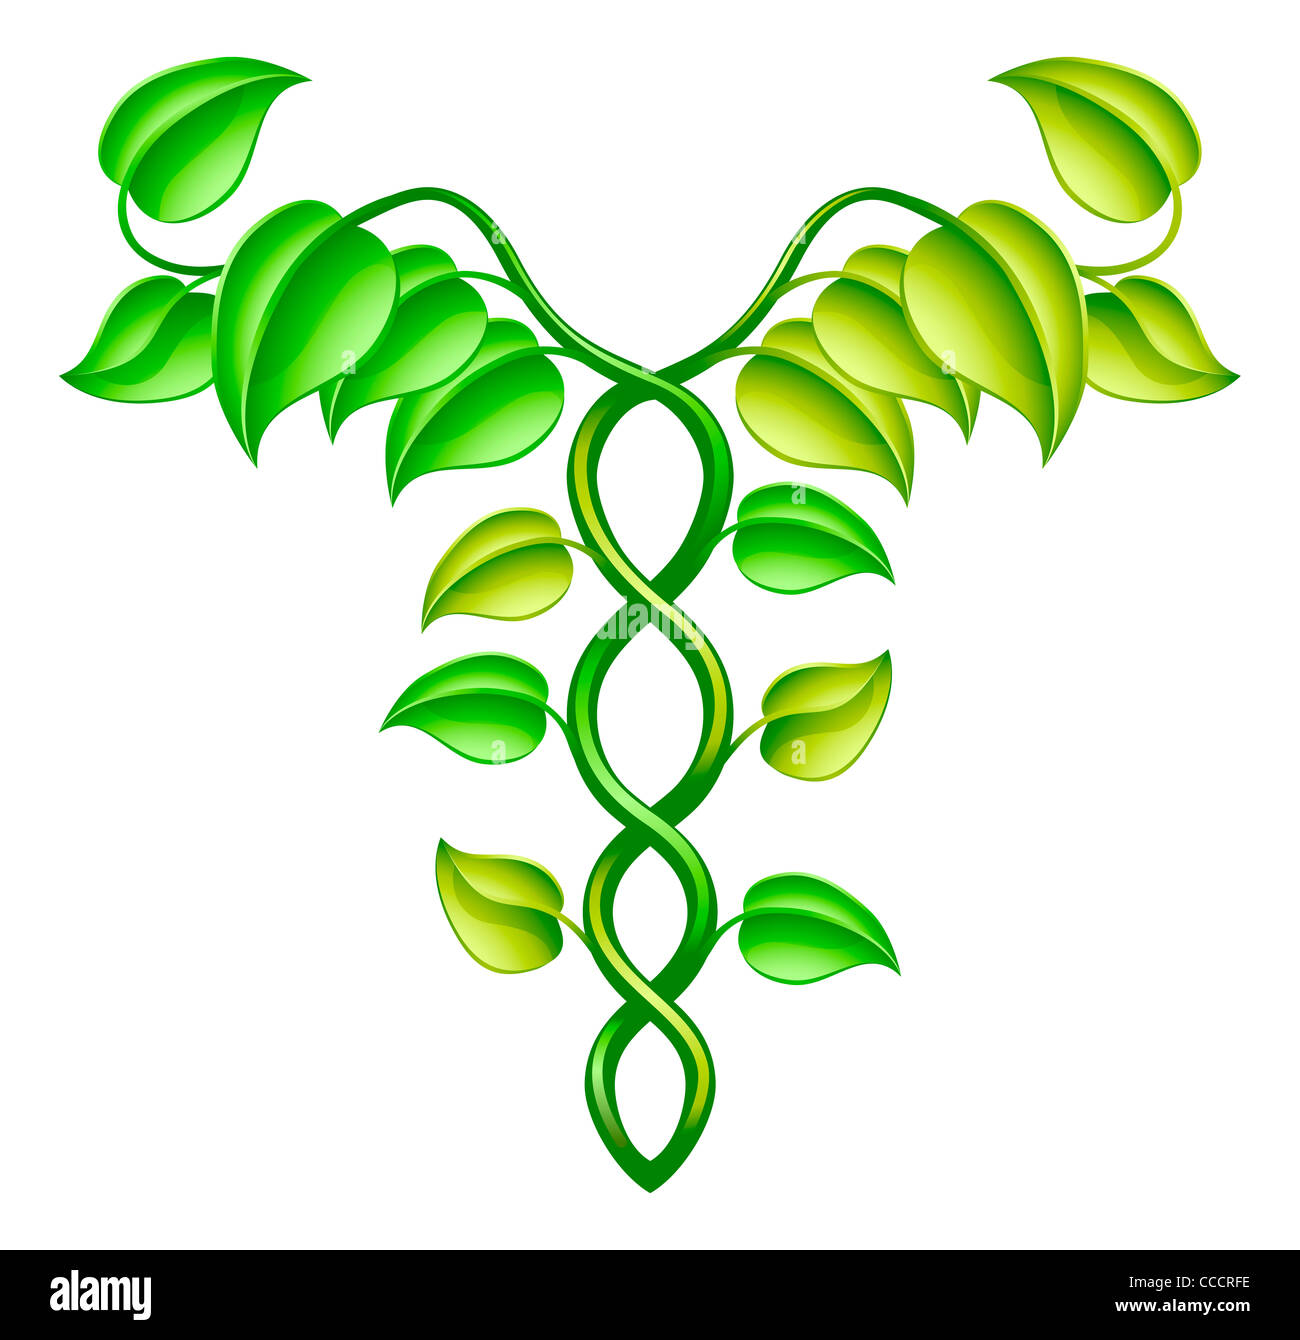 Natural or alternative medicine concept of two vines intertwined in a caduceus style. Stock Photo